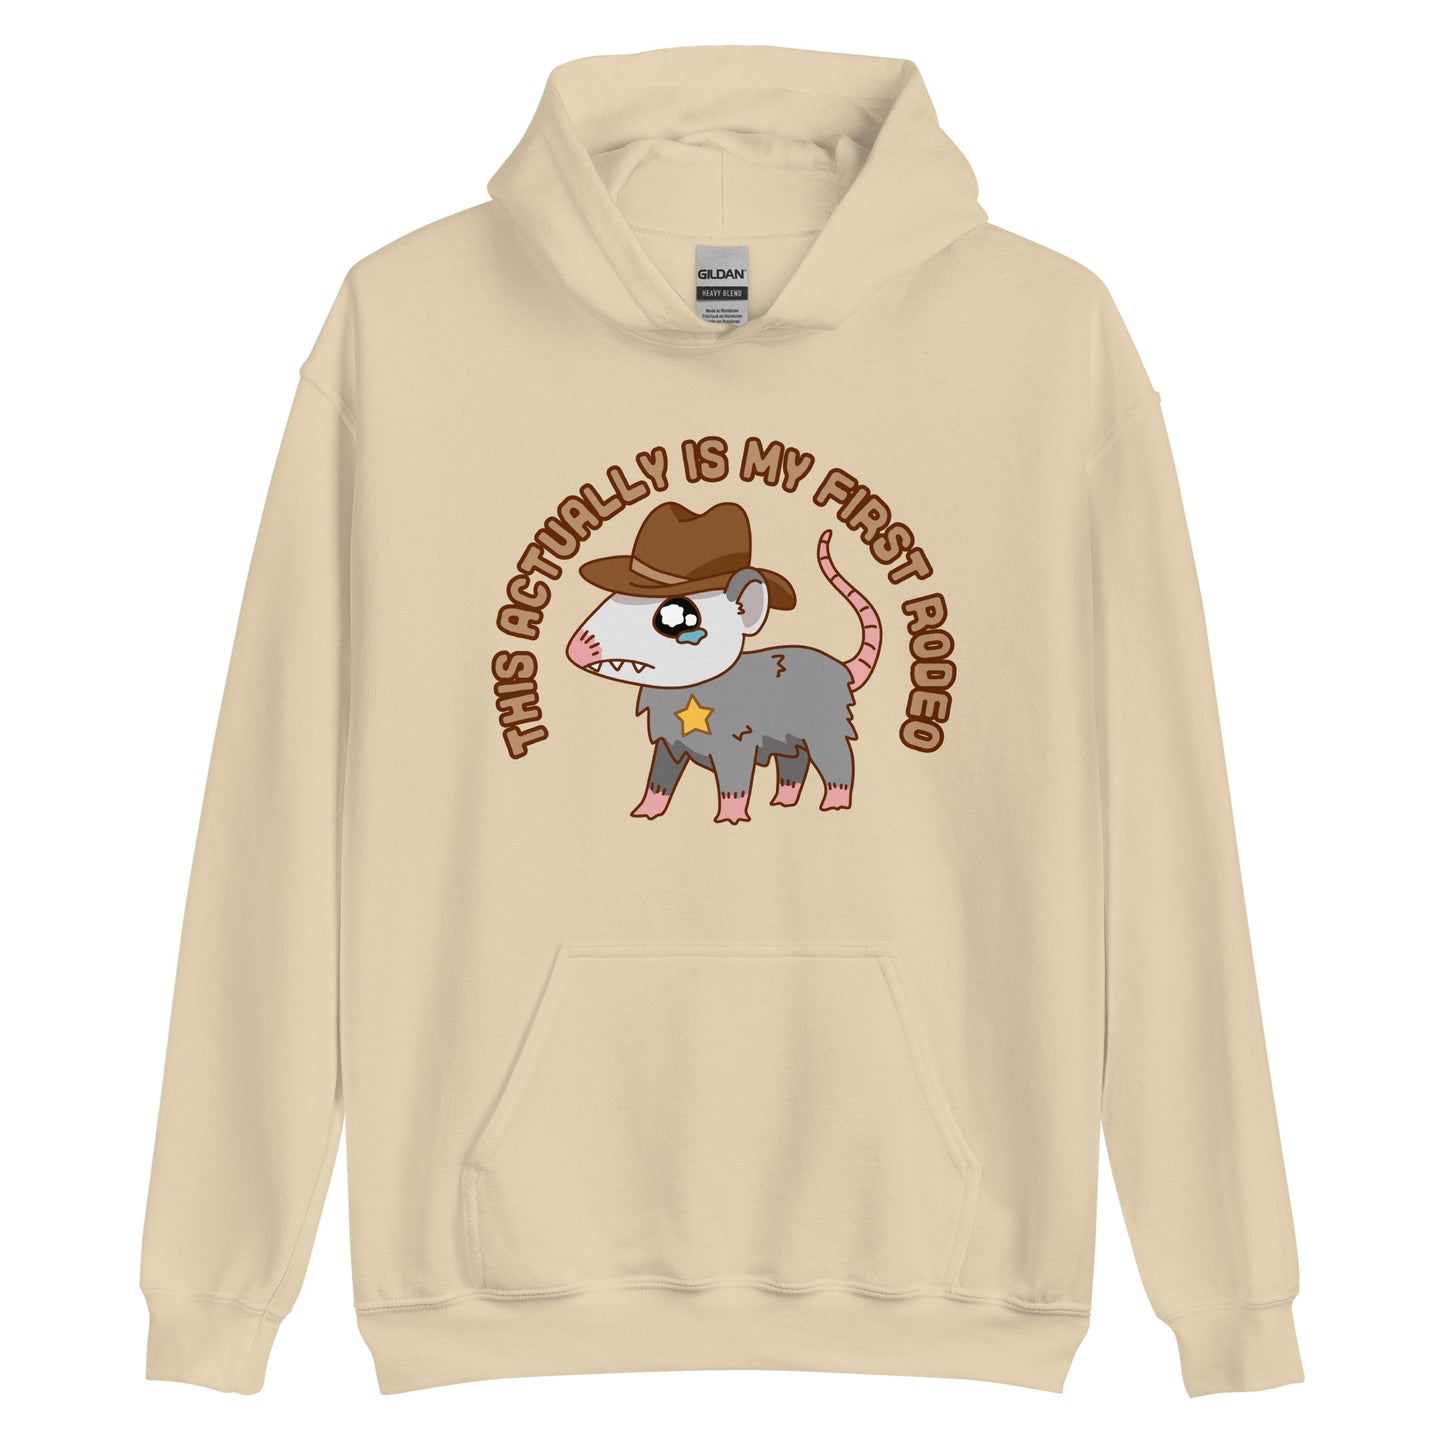 A tan-colored hooded sweatshirt featuring an illustration of a cute and nervous possum wearing a cowboy hat and sherrif's star badge. Text above the possum in an arc reads "this actually is my first rodeo".